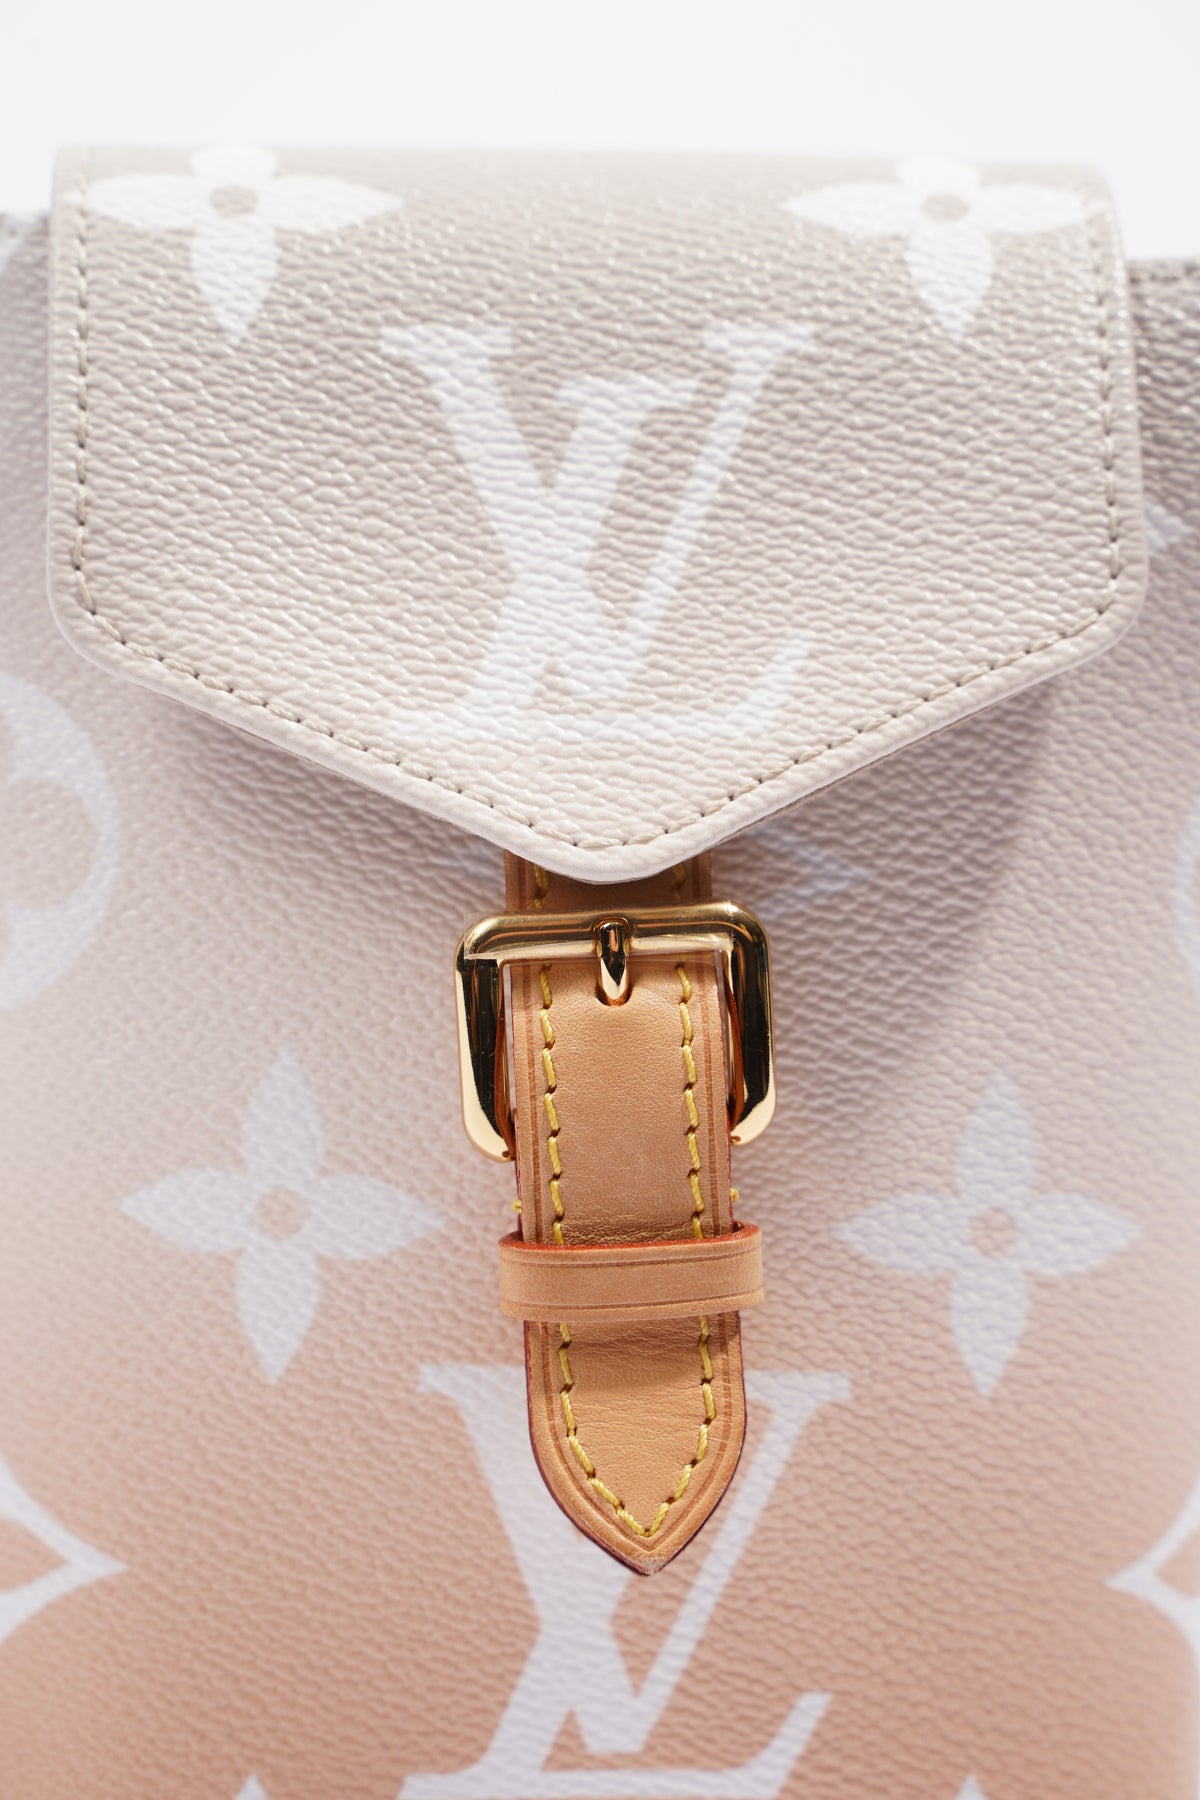 Louis Vuitton Tiny Backpack By The Pool Collection, Luxury, Bags